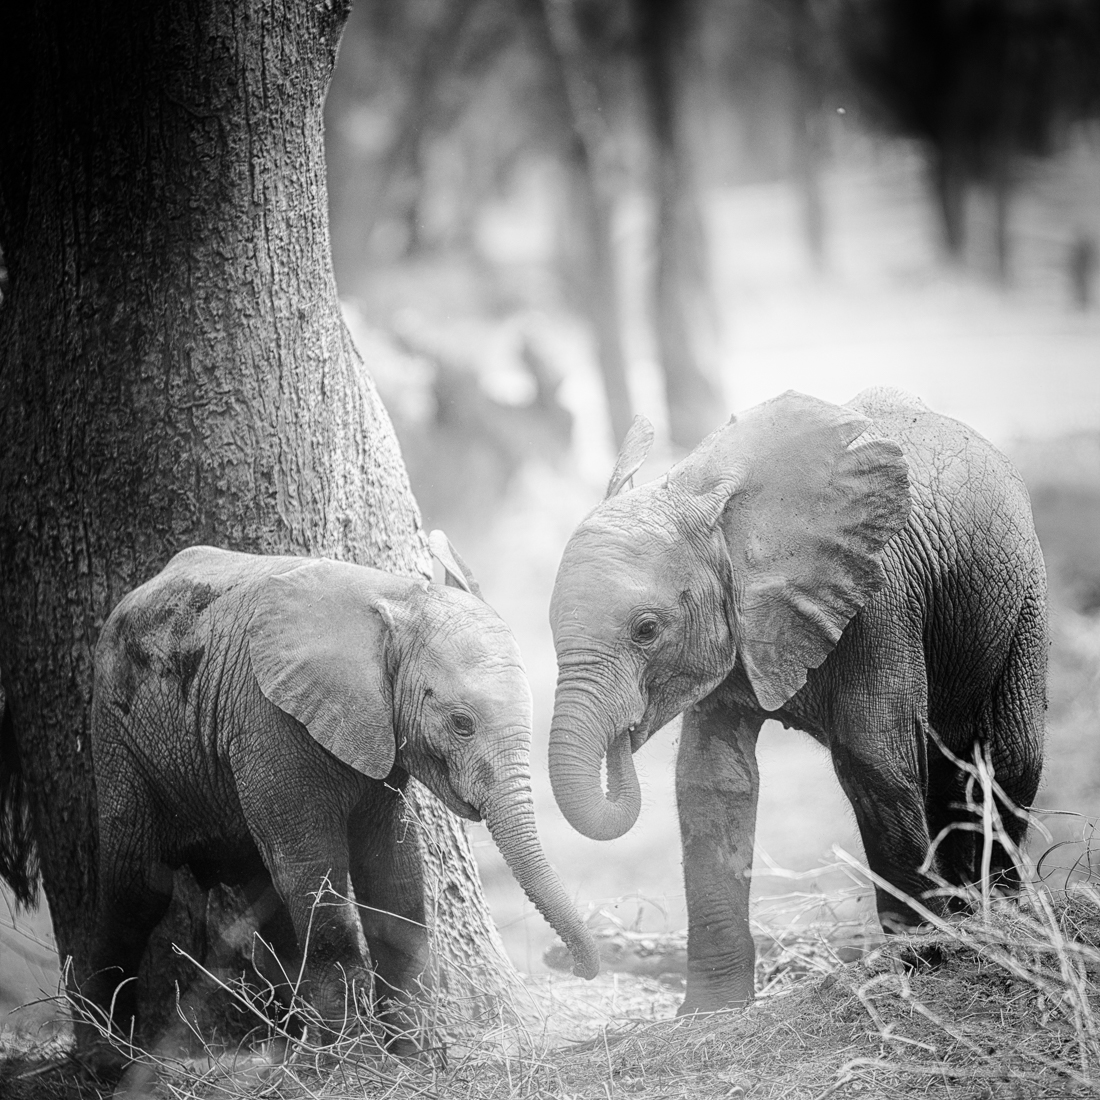 the path of each little elephant - finding friends for life and confidence